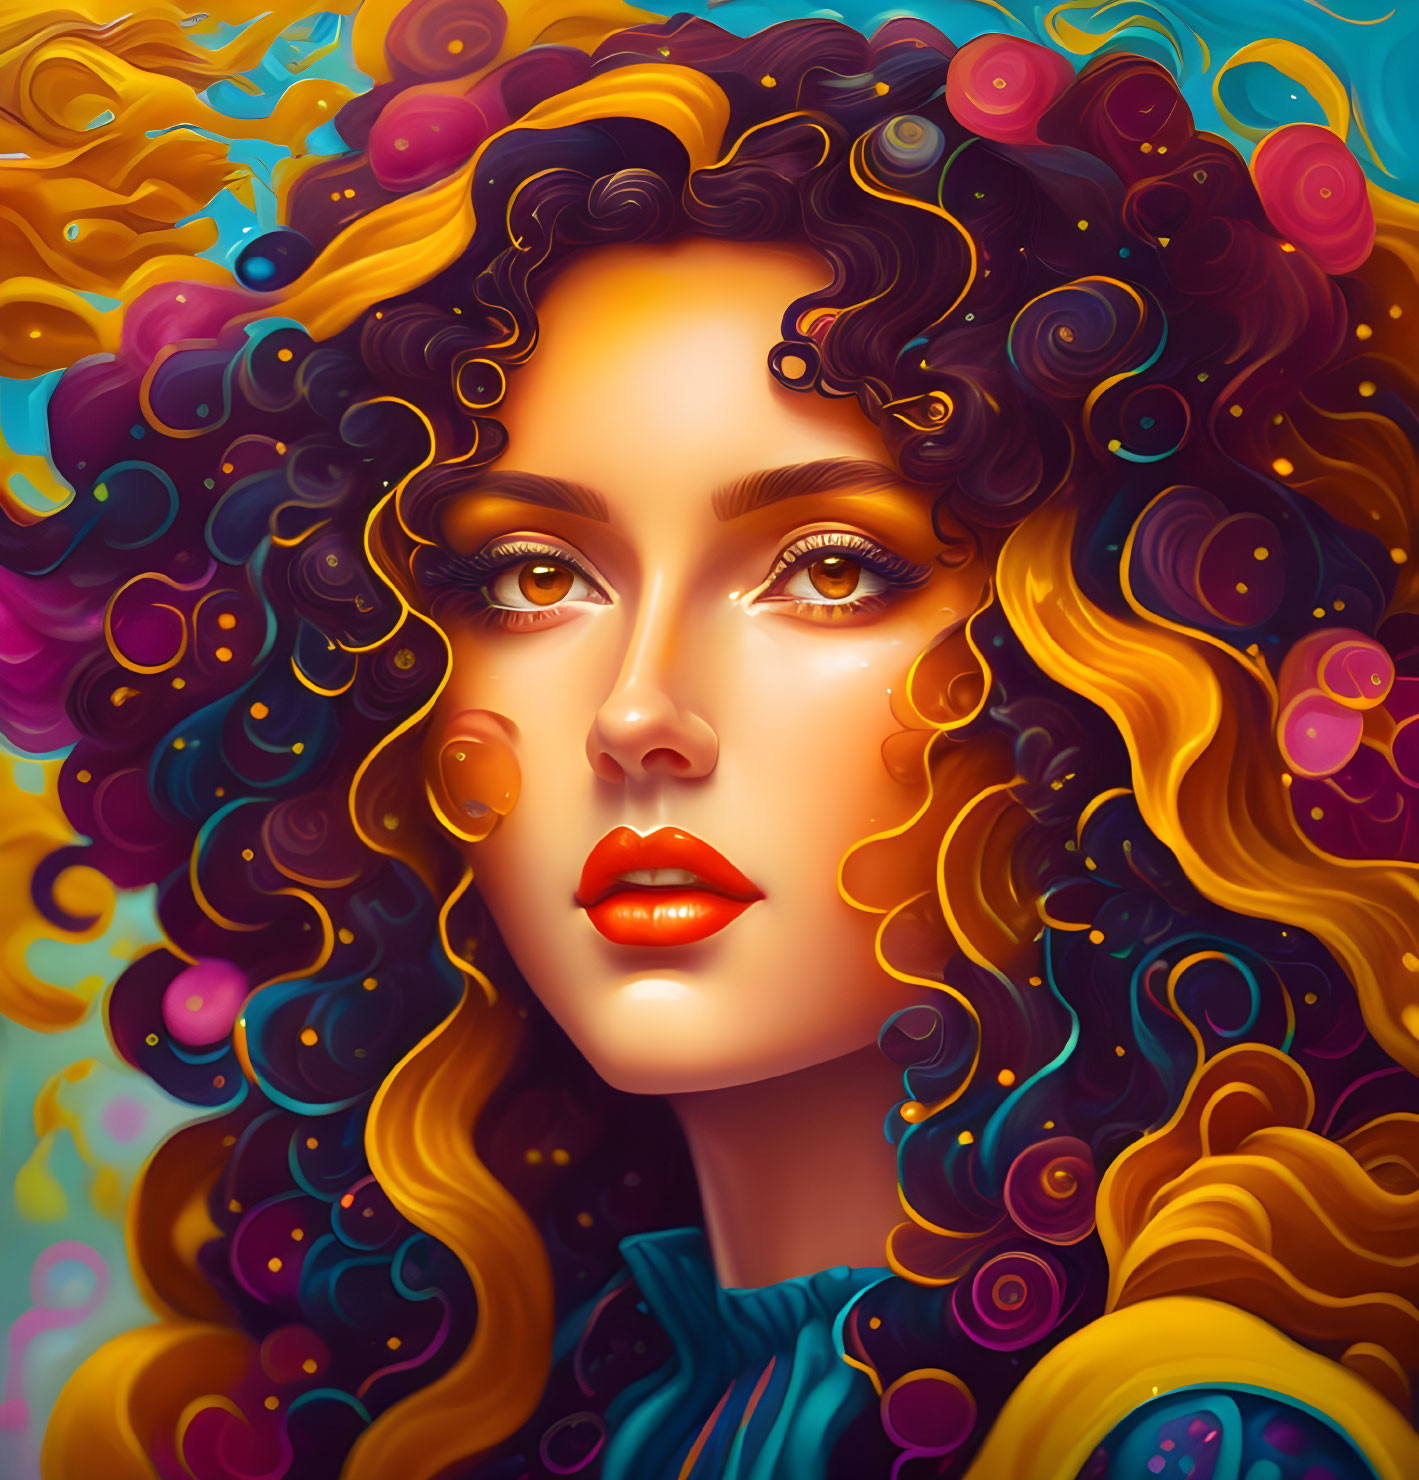 Colorful digital portrait of a woman with curly hair and dreamlike orbs.